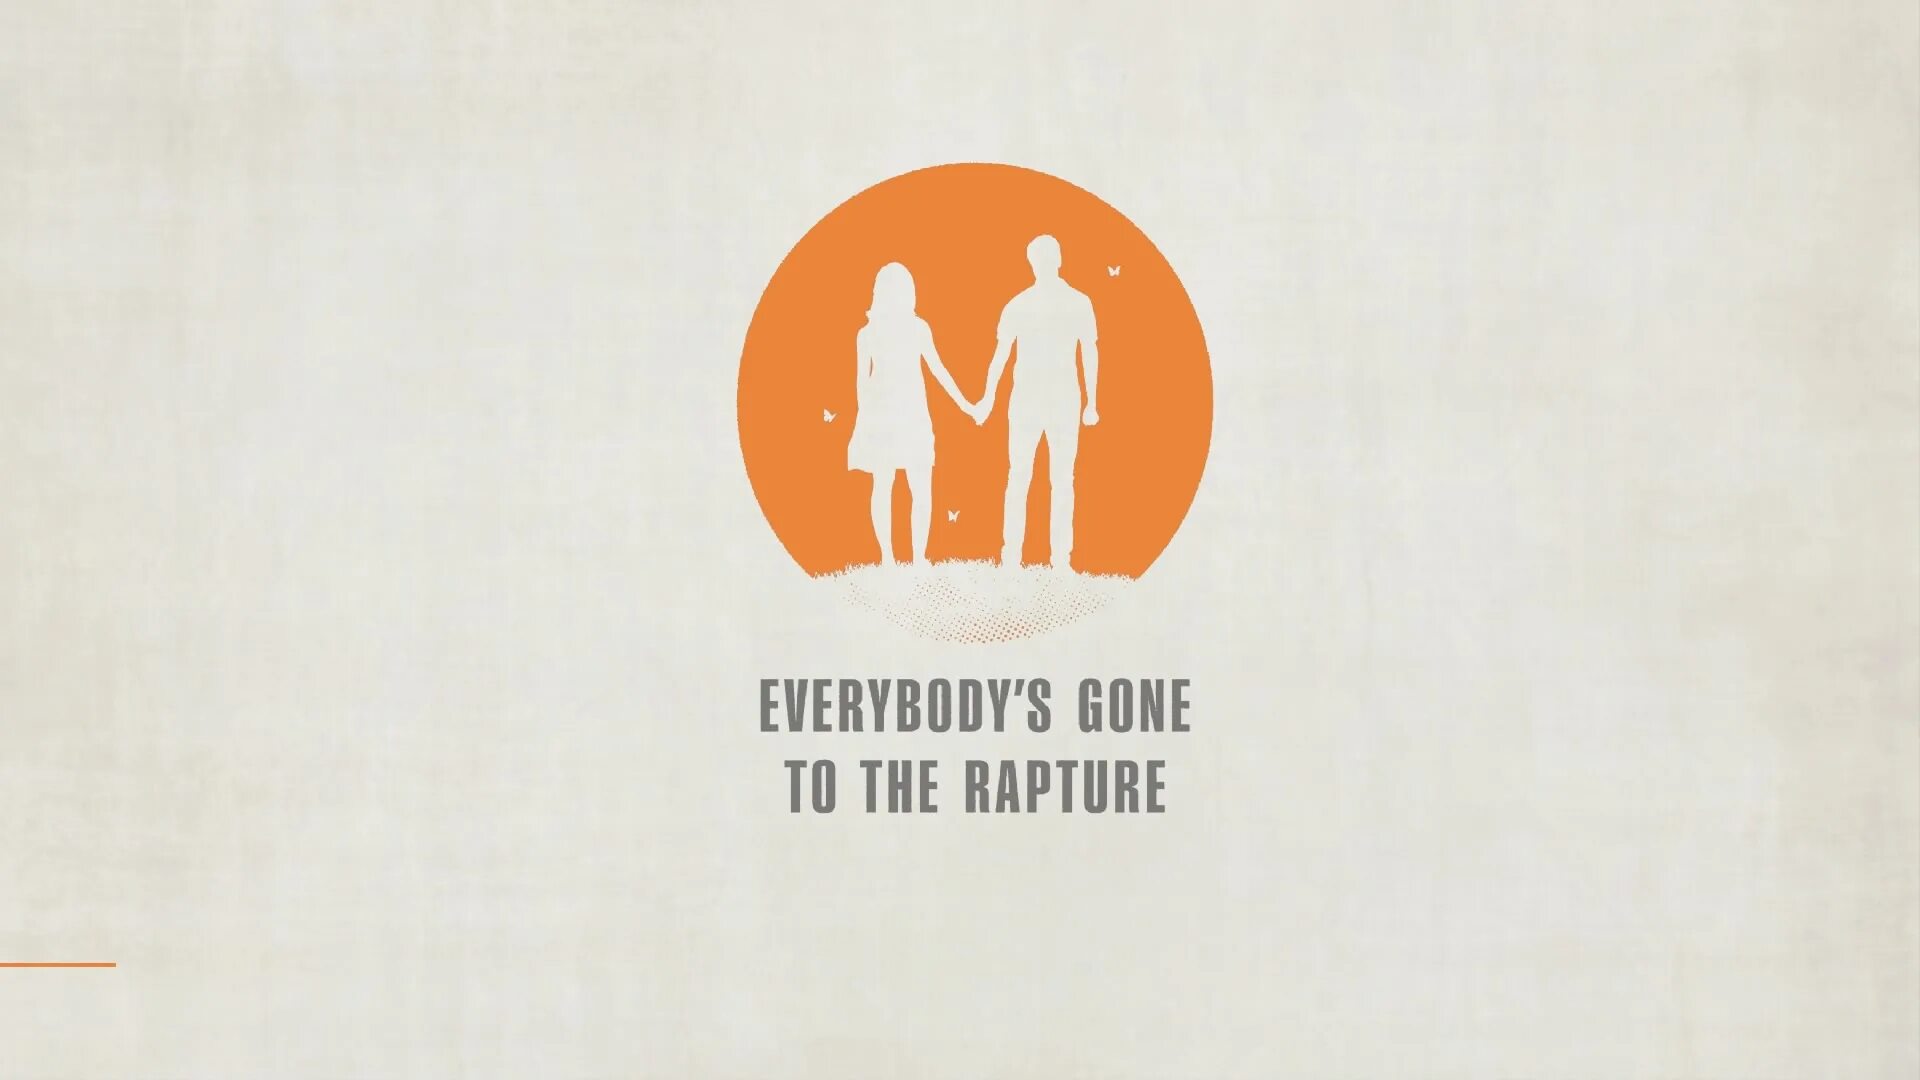 Everybody’s gone to the Rapture. Everybody's gone to the Rapture (2015). Everybody's gone to the Rapture логотип. Everybody going to the Rapture.